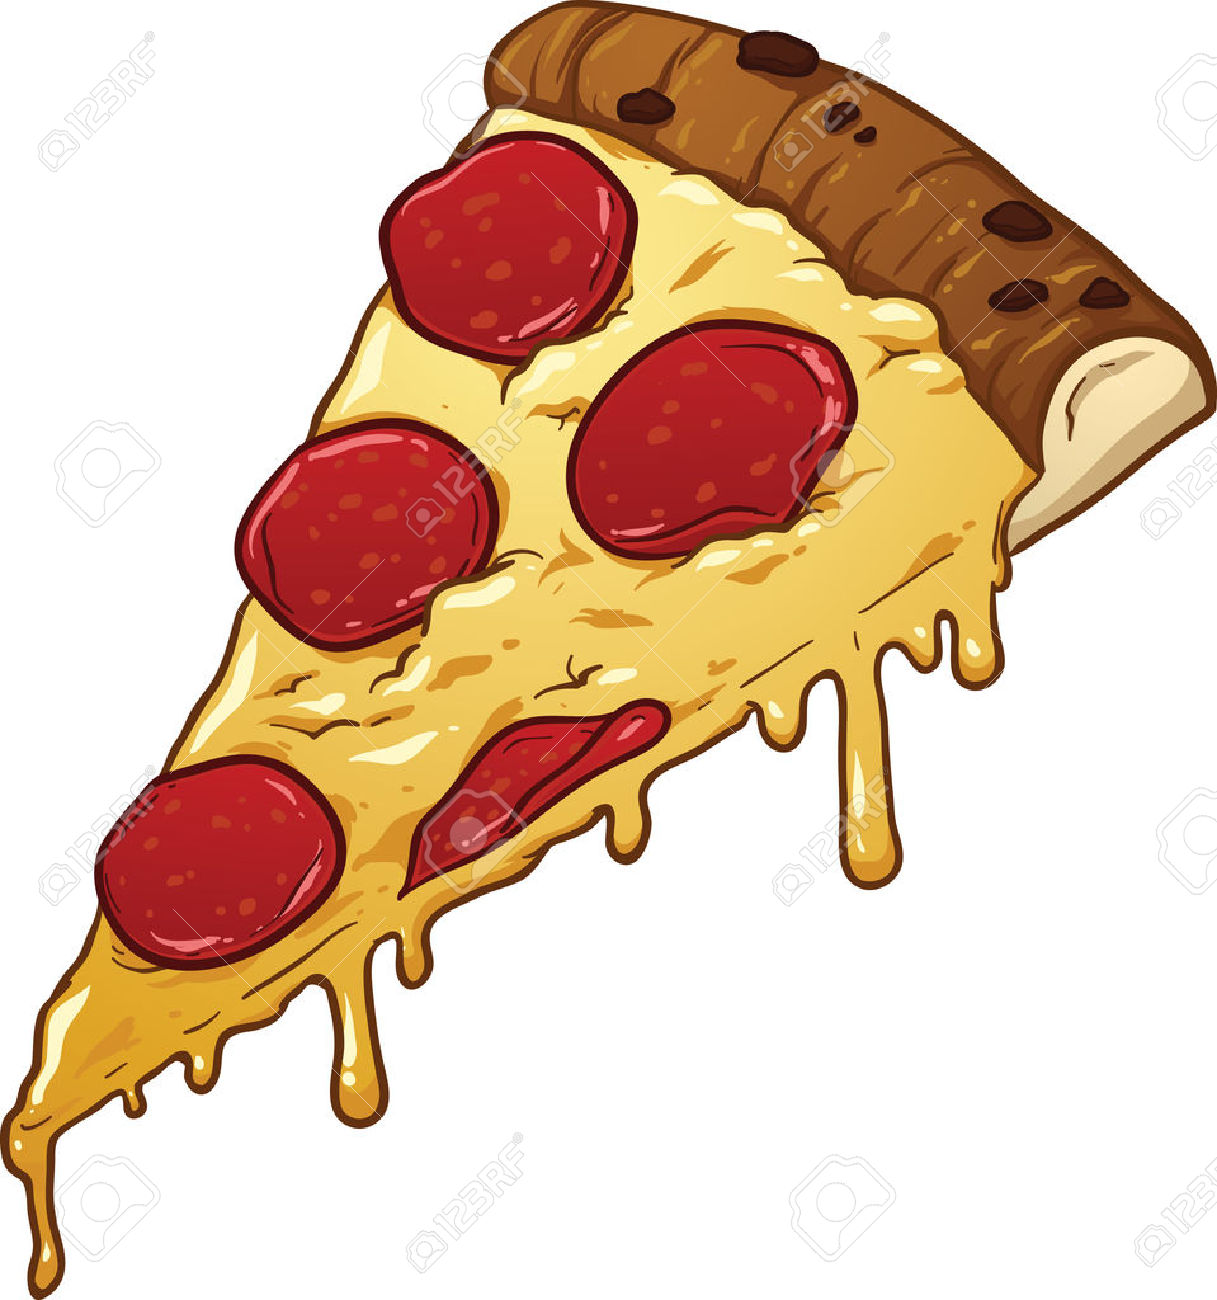 pizza clipart melting